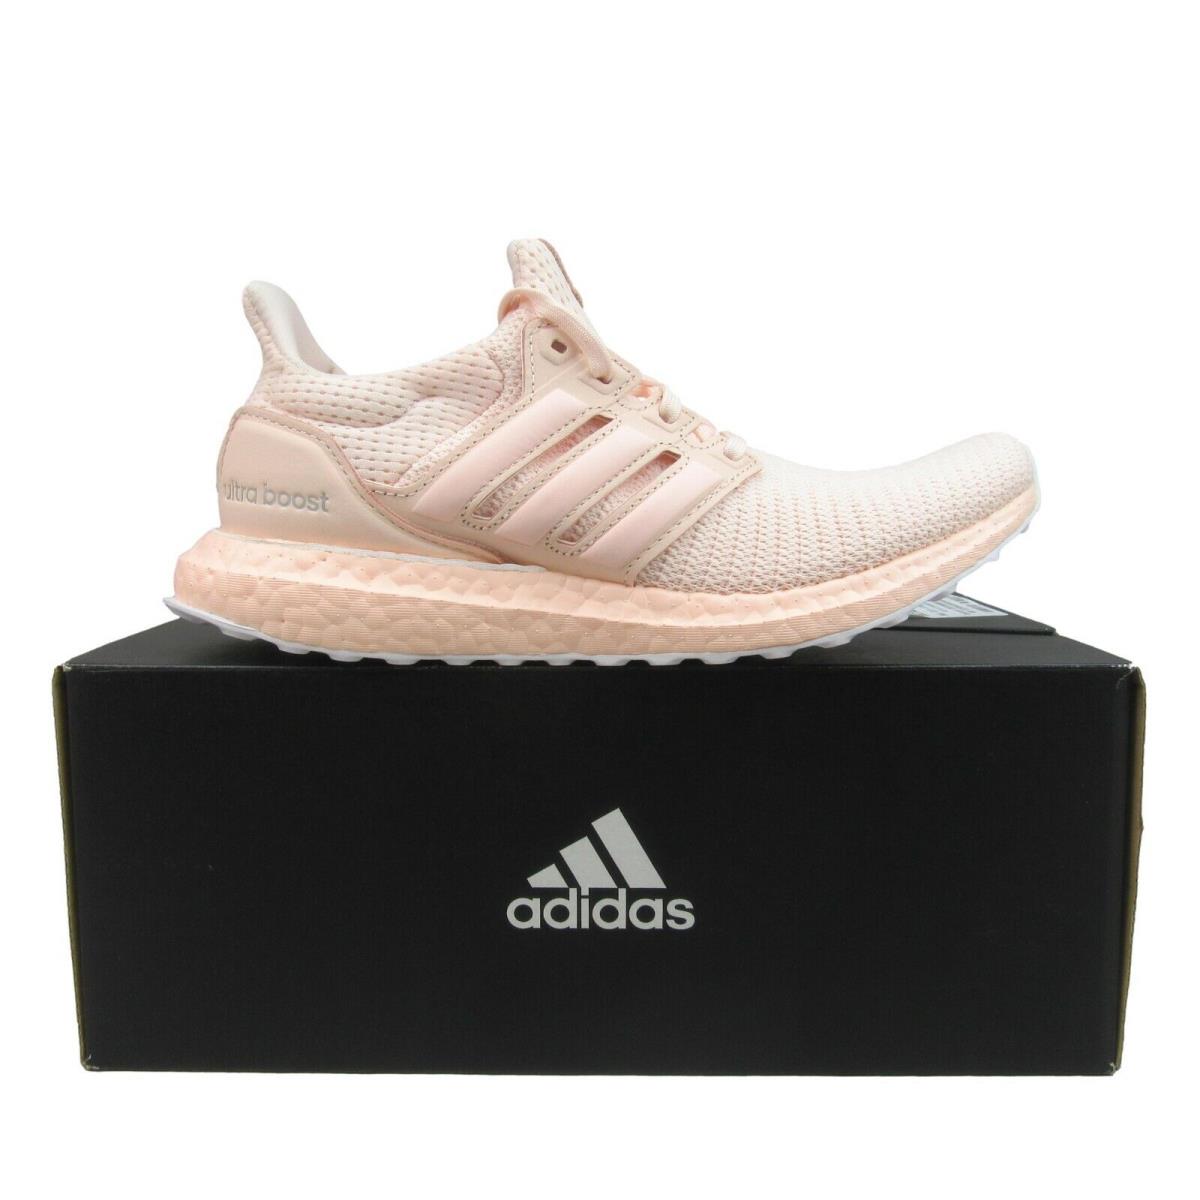 Adidas Ultraboost Gym Running Shoes Women`s Size 7 Pink Tint White FY6828